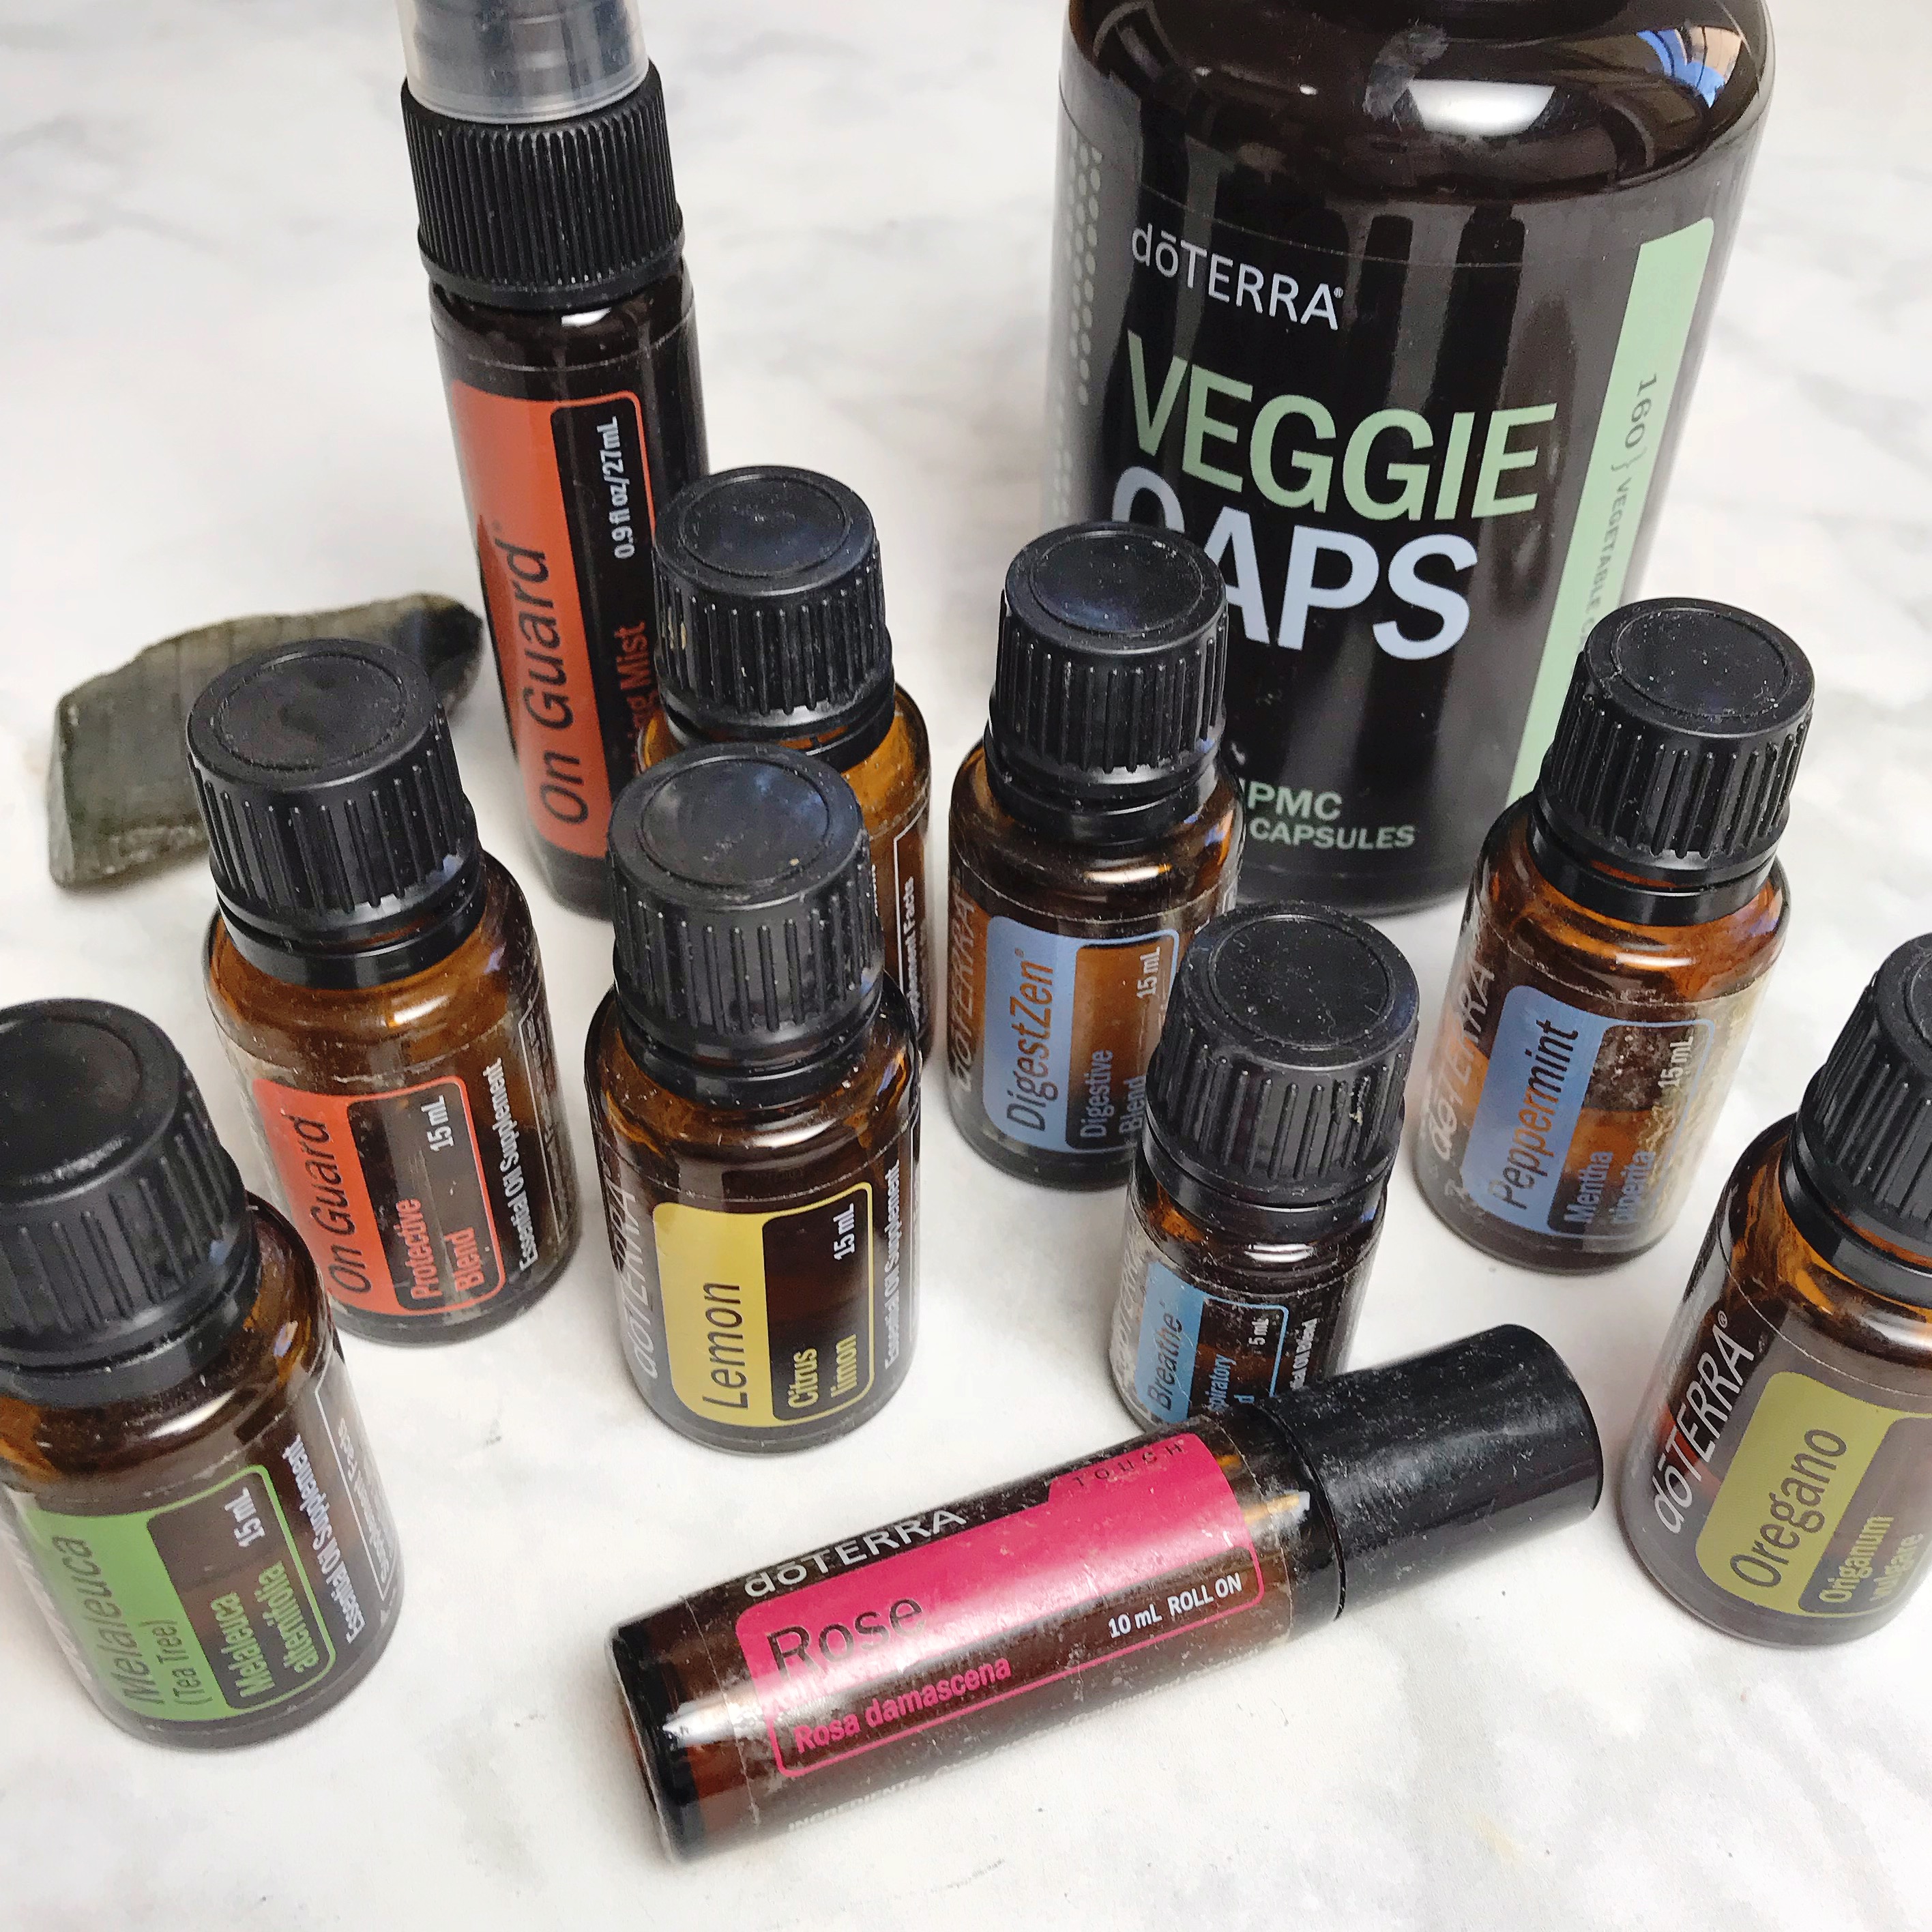 Essential Oils to Bring on Travel